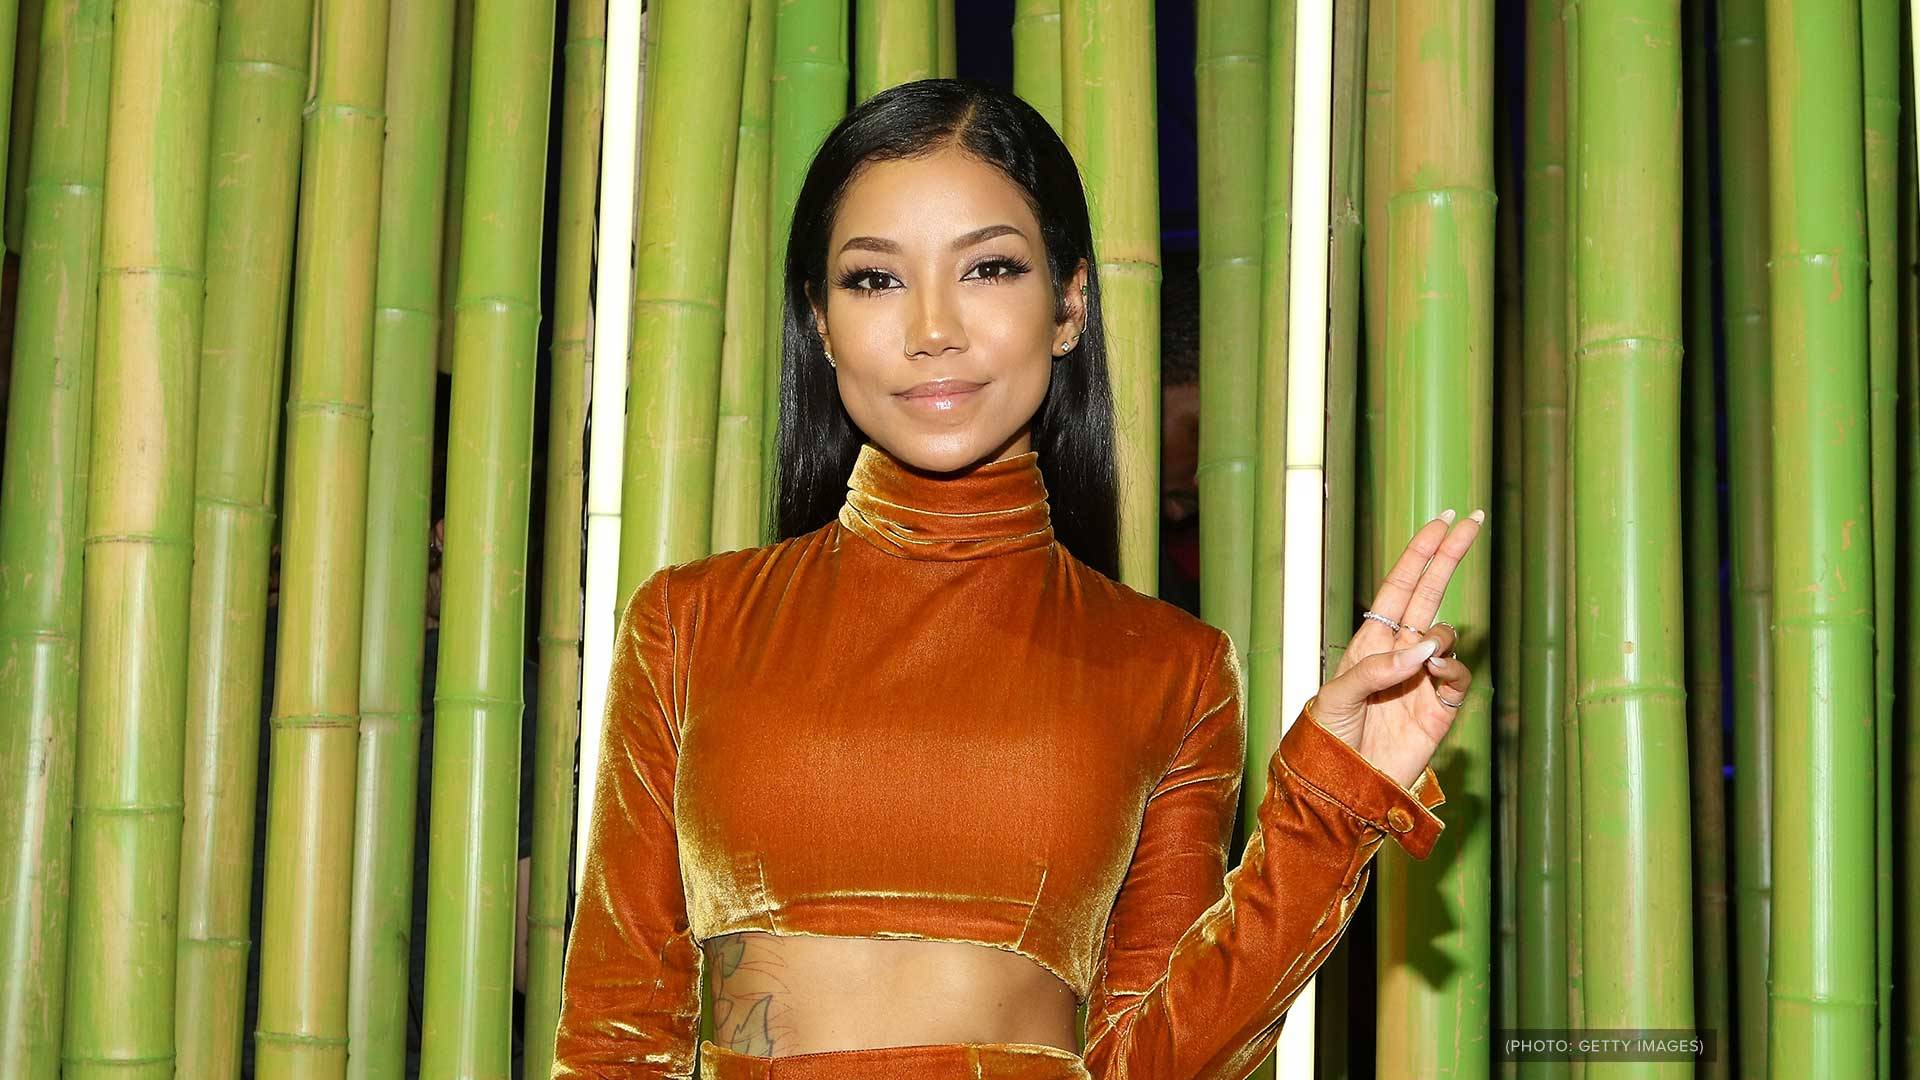 BET Awards 2022: 5 of Jhené Aiko's Most Hypnotizing Songs of All